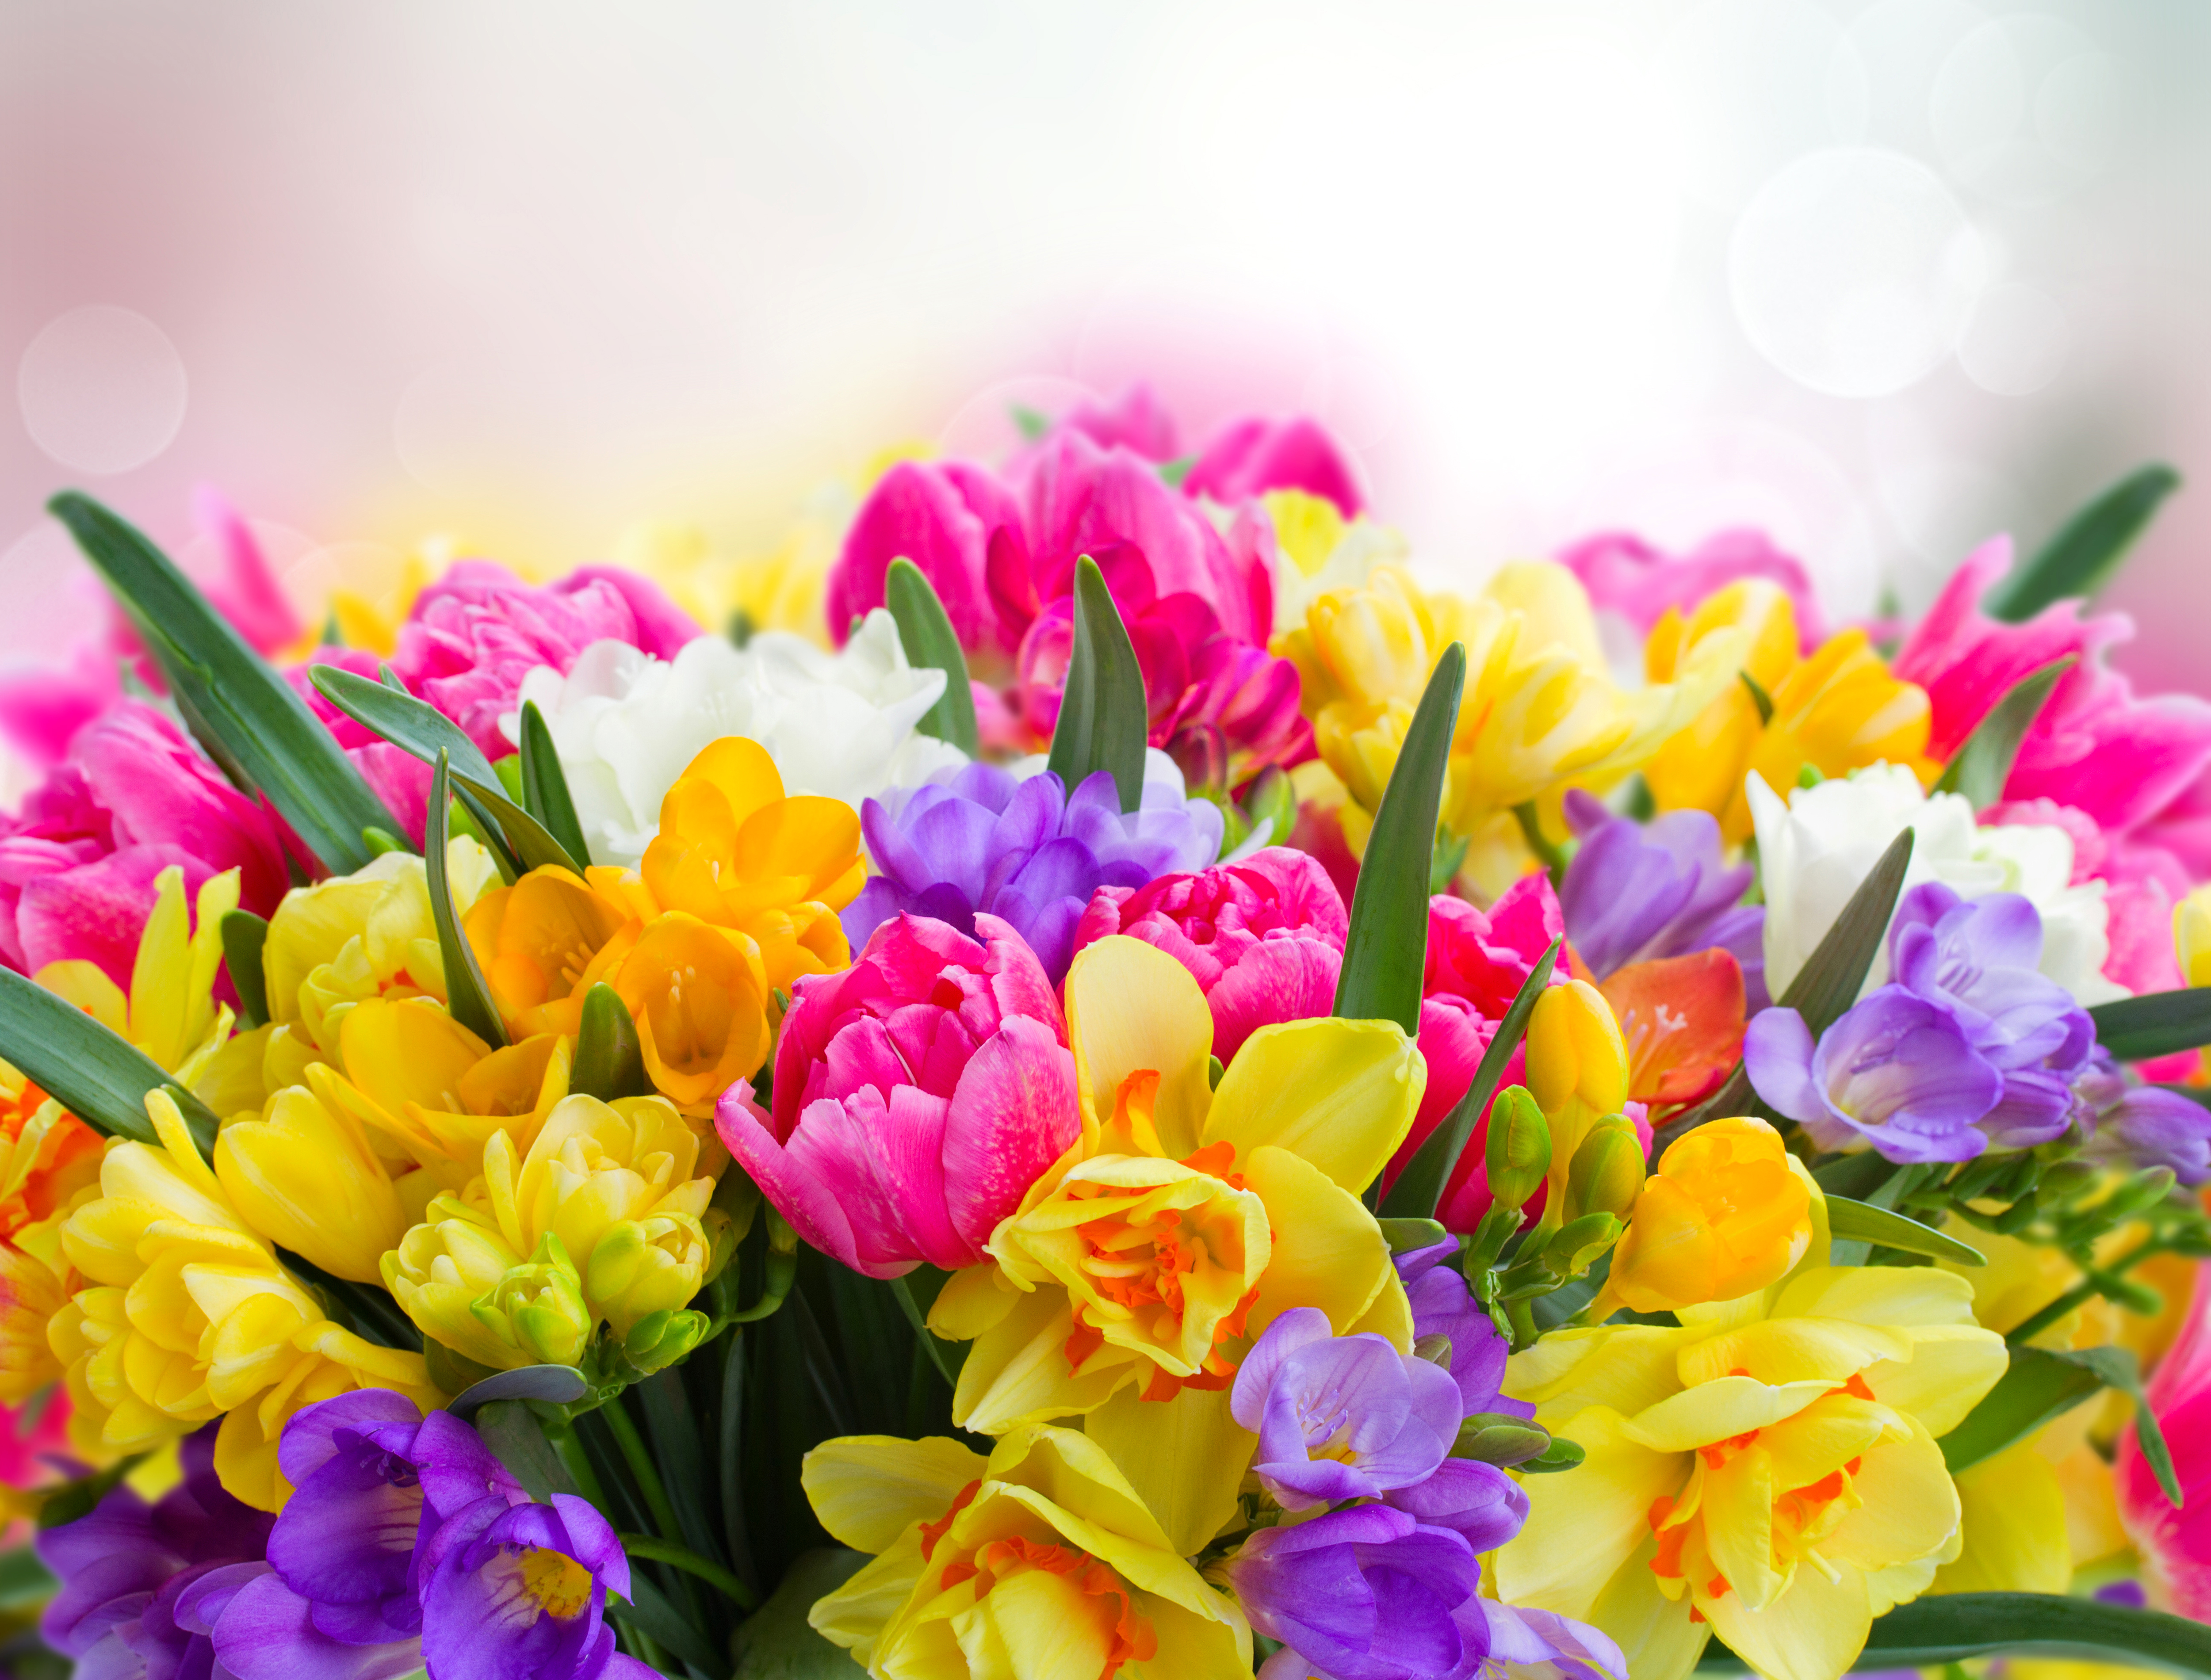 purple flower, yellow flower, flowers, pink flower, earth, flower, colorful, colors phone background